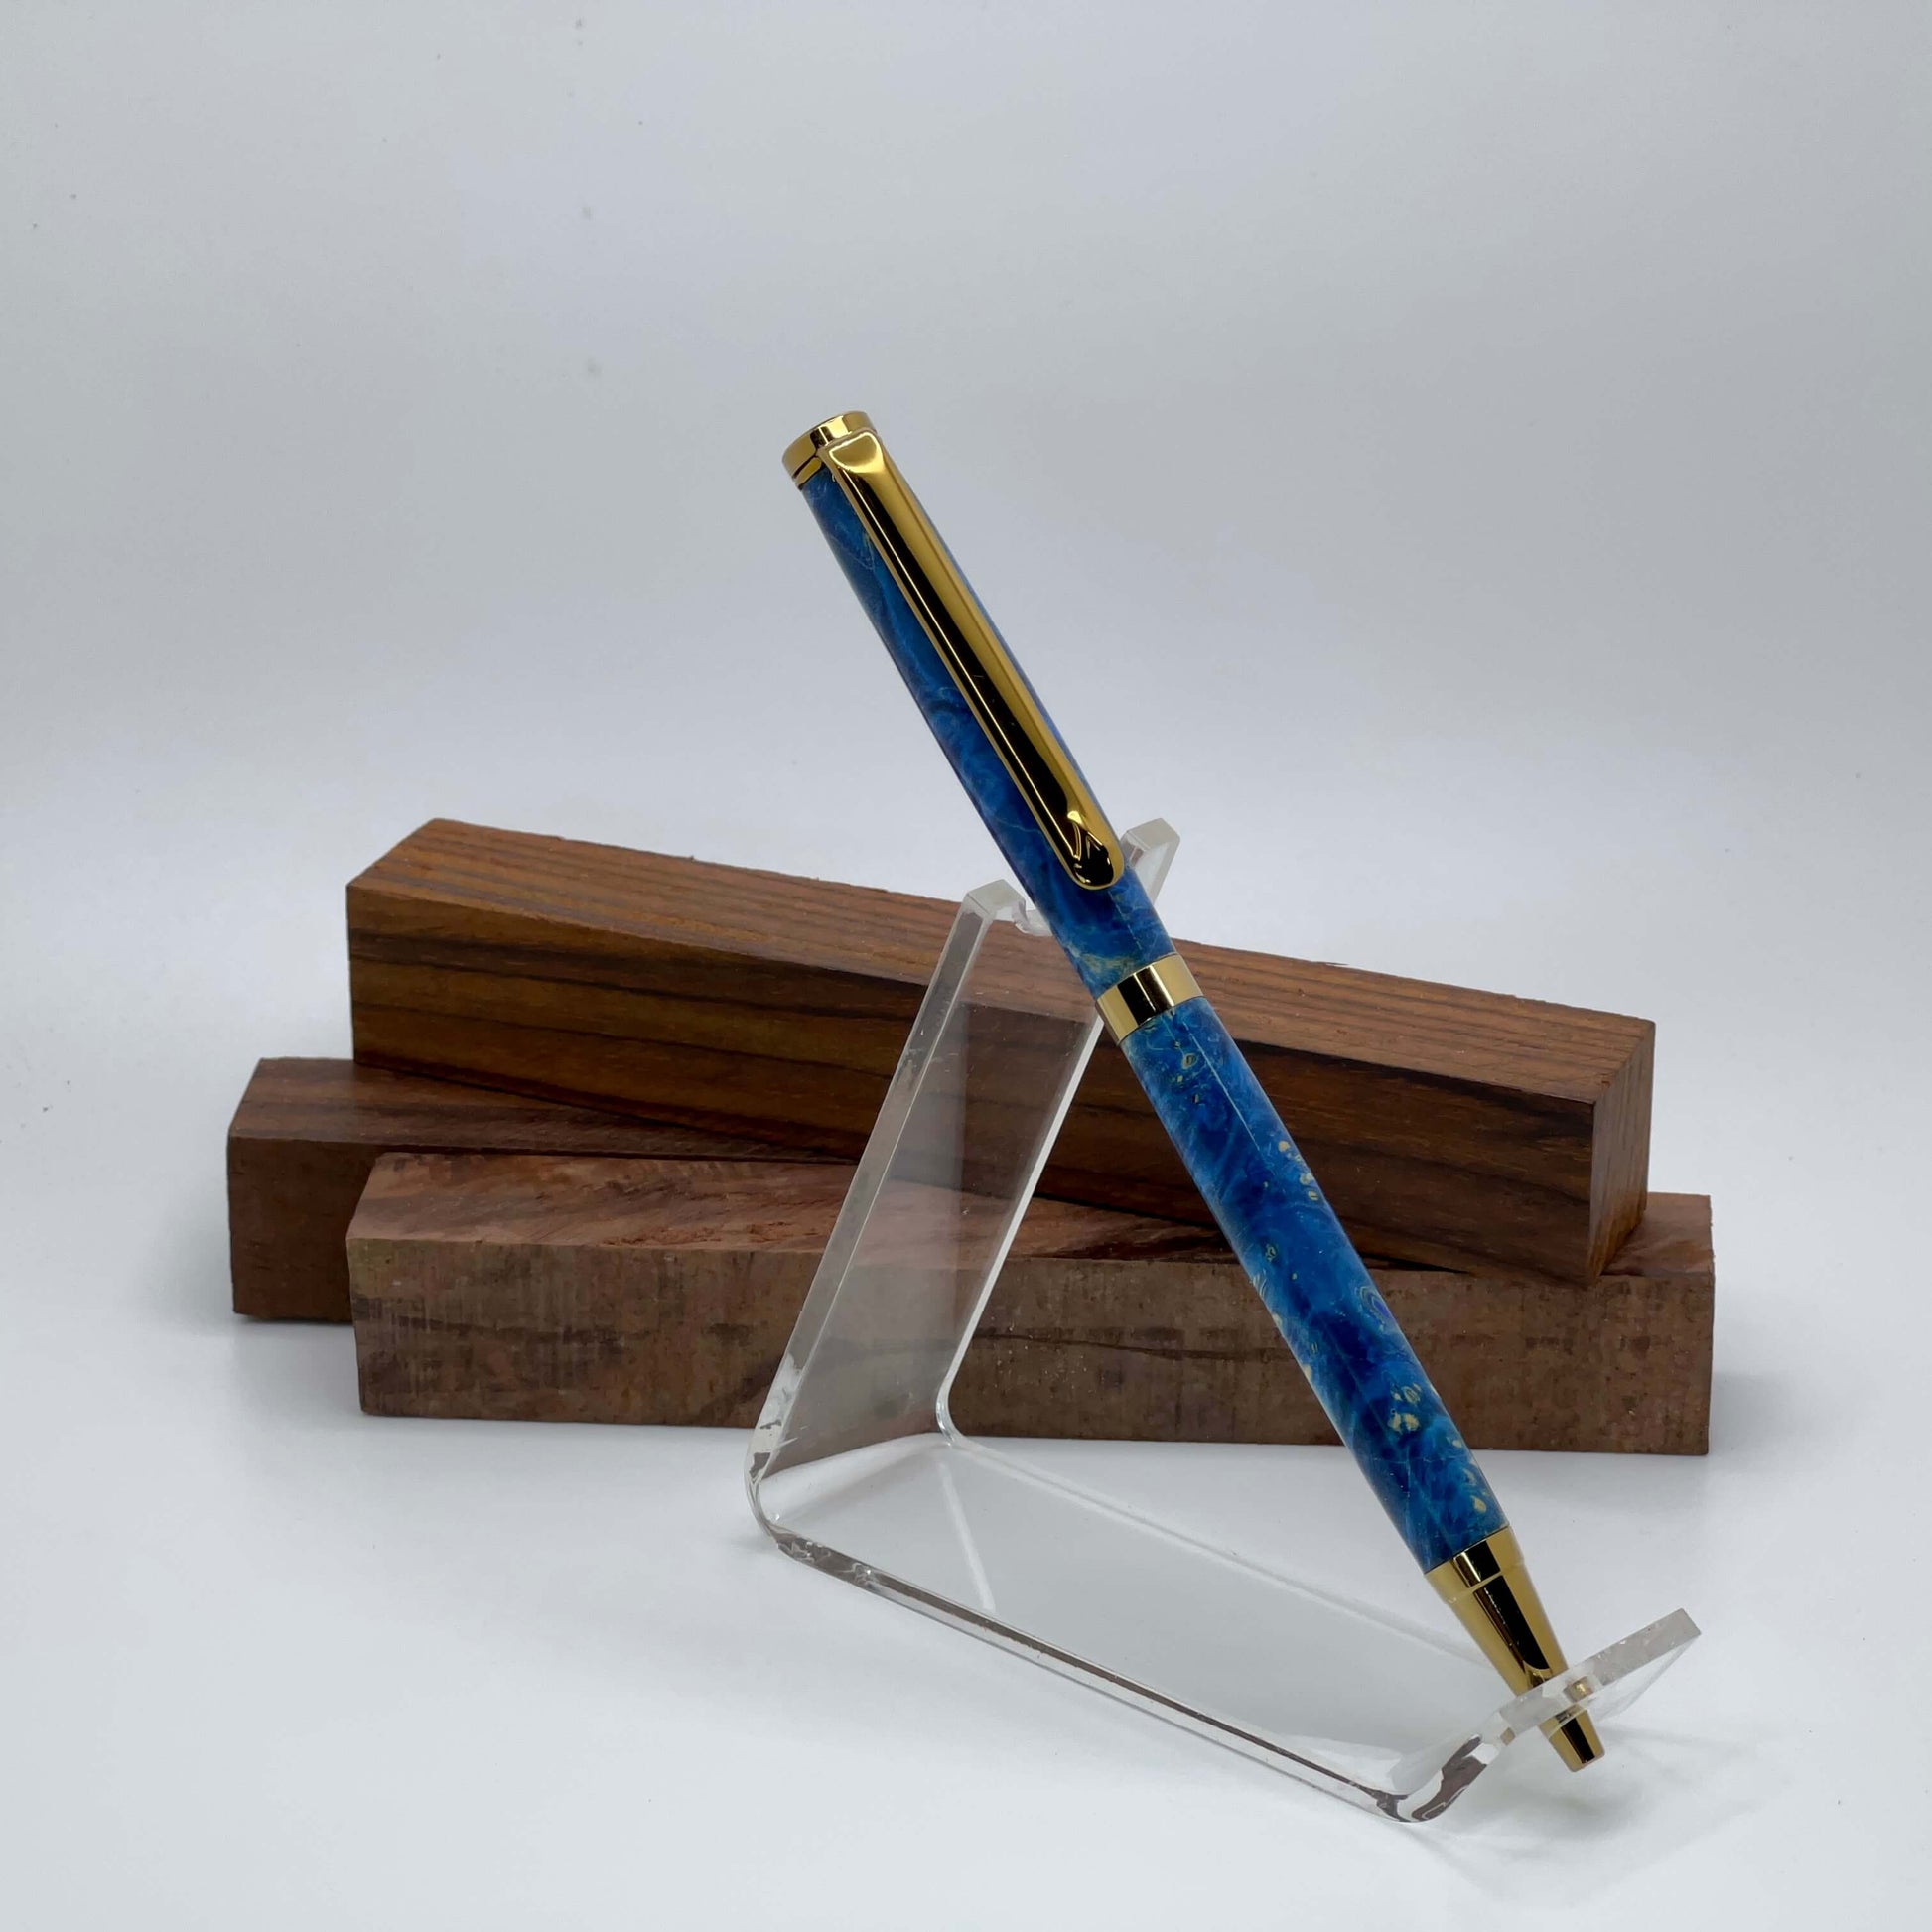 Handcrafted Box elder wood pen dyed blue setting on driftwood